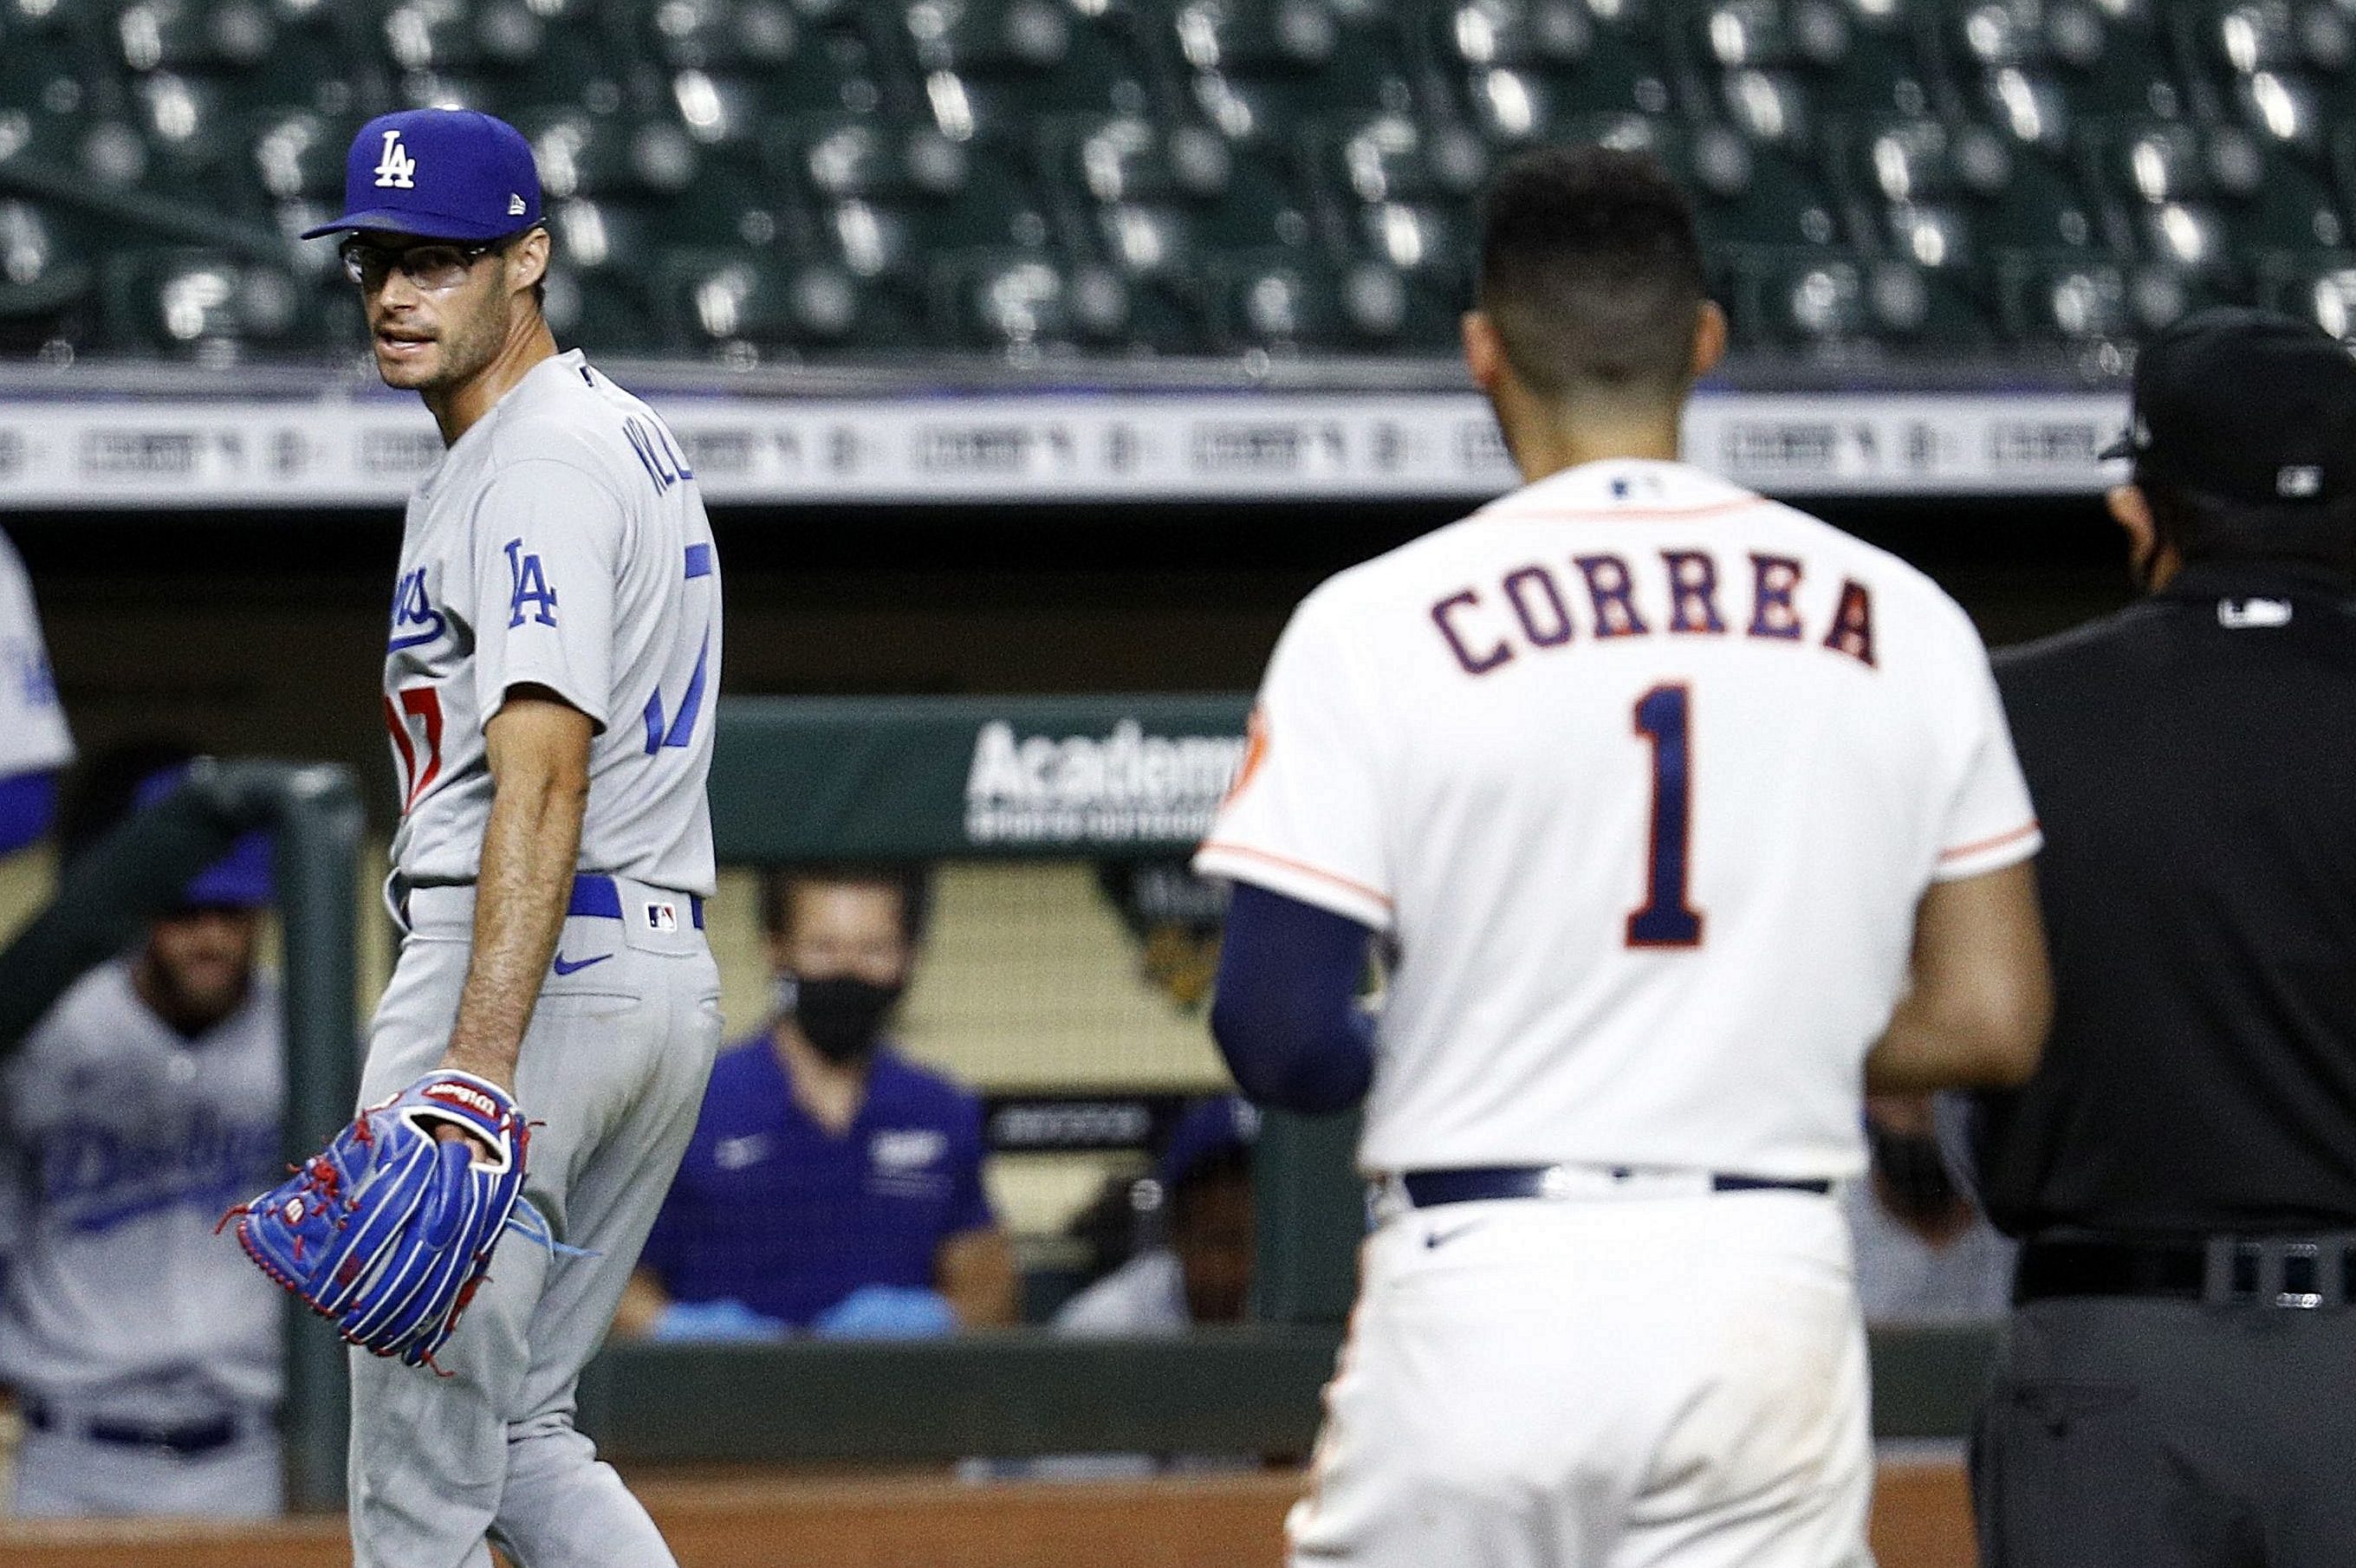 Joe Kelly of the Dodgers has a word with Carlos Correa of the Astros. (Bob Levey/Getty)